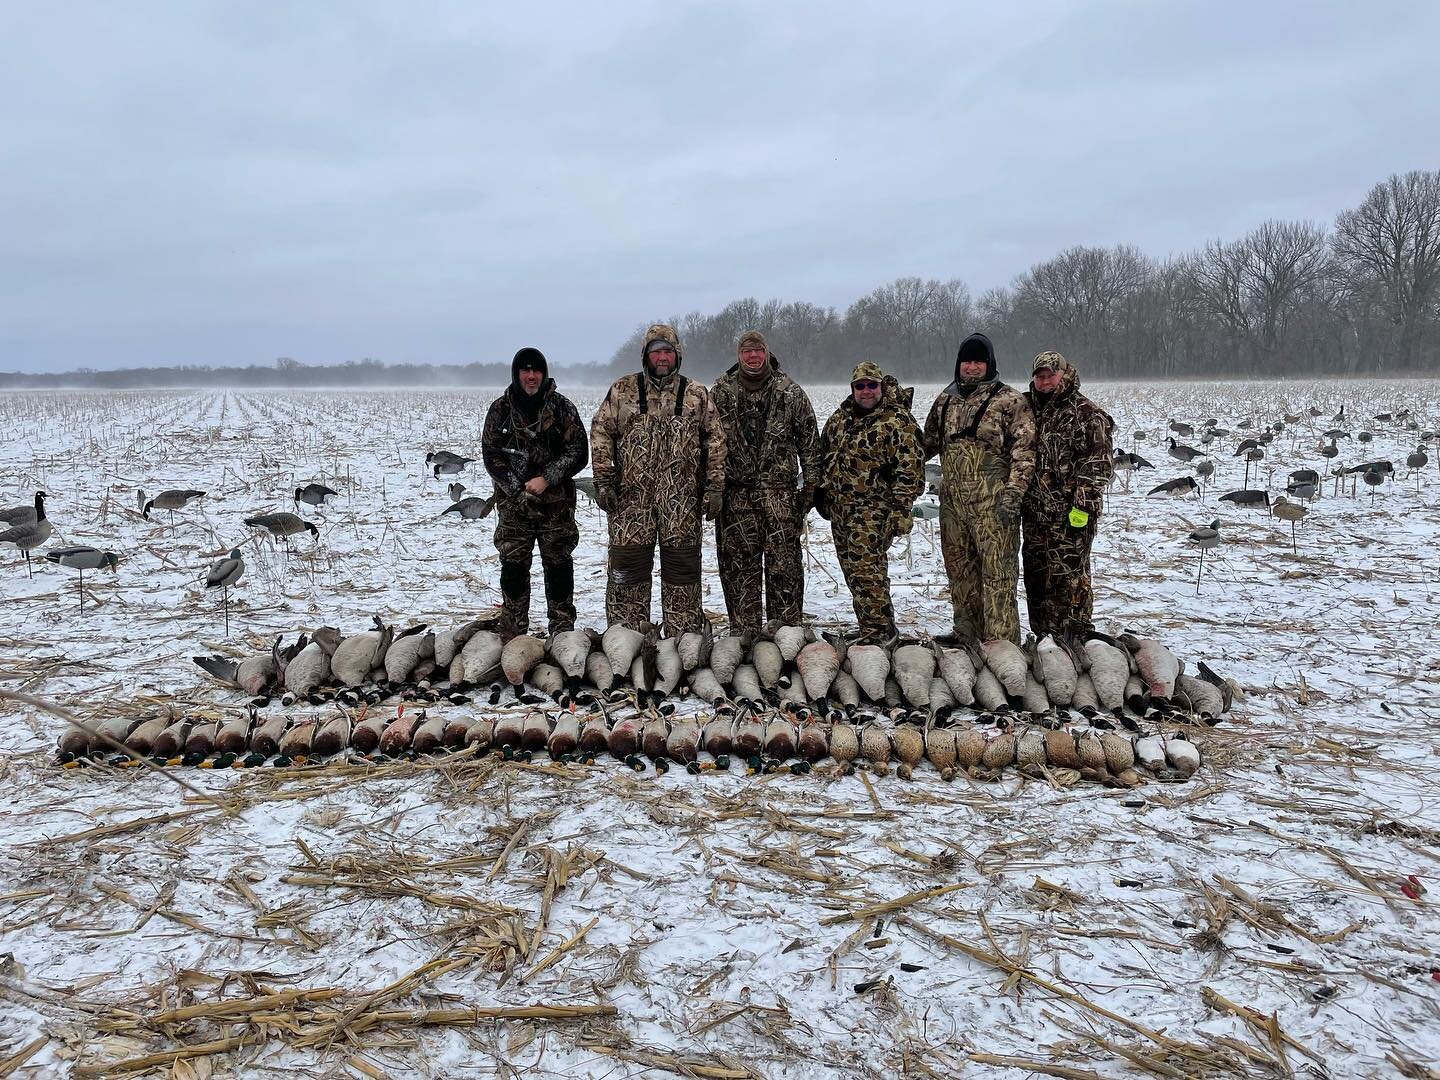 &quot;True Kansas Outdoors, your premier destination for the ultimate hunting adventure! Our experienced guides and staff are dedicated to providing you with a safe, enjoyable, and successful hunting experience. Whether you're a seasoned hunter or a 